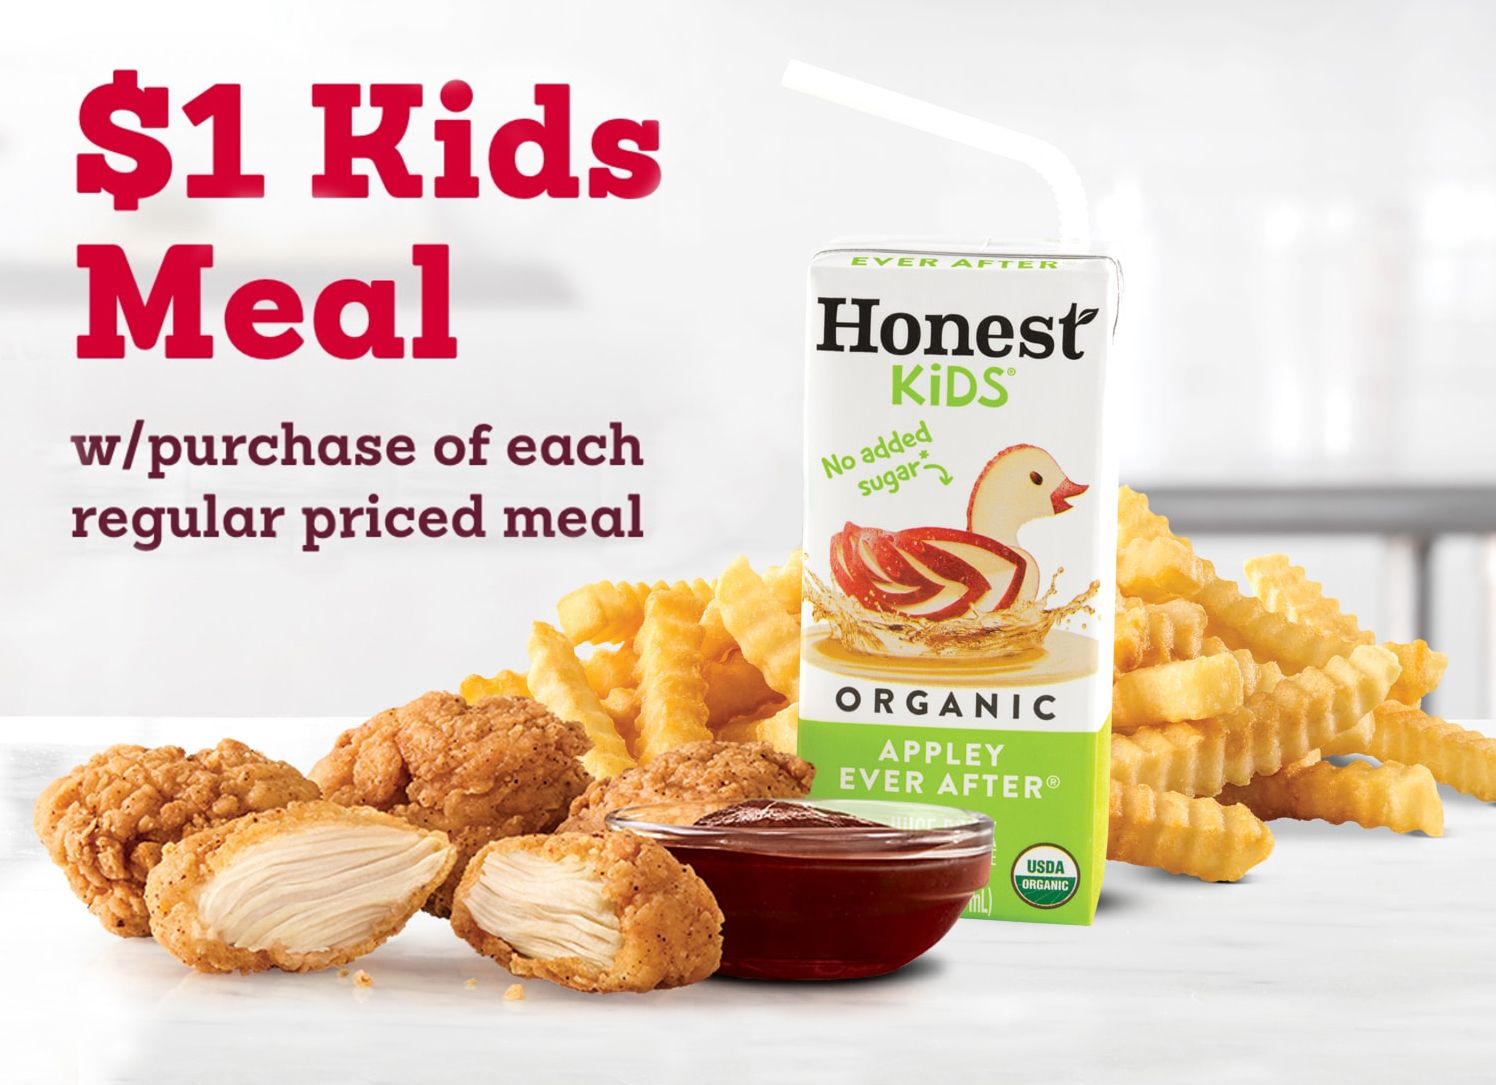 Get 1 Kids Meal for $1 When You Buy 1 Regularly Priced Meal at Arby’s for a Limited Time Only